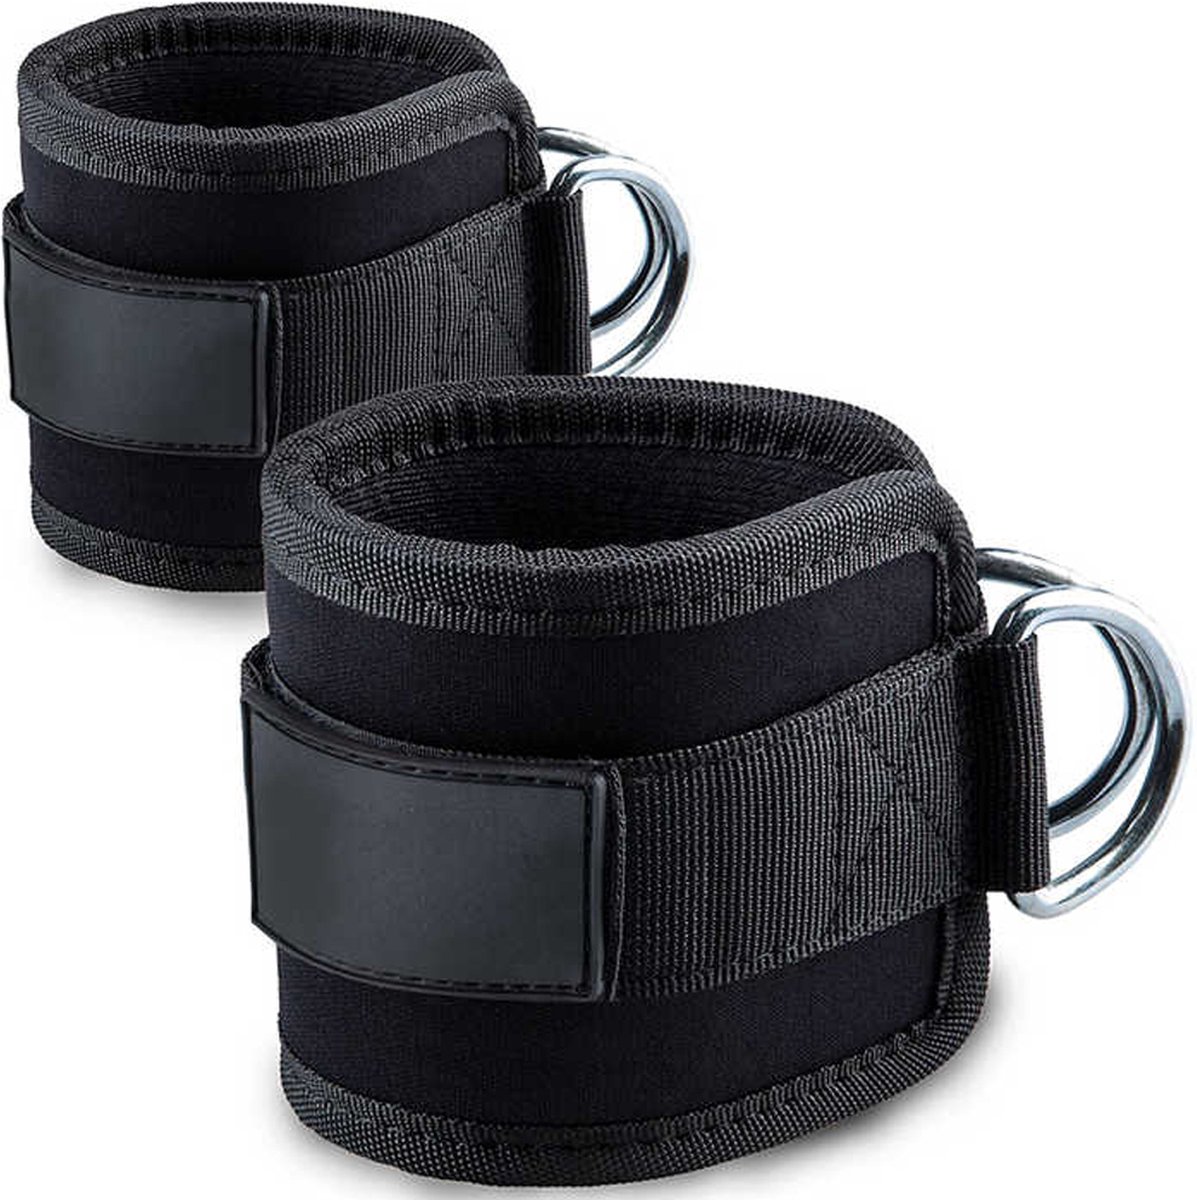 ExclusivX - enkelband fitness -ankle strap - Voordeelverpakking - ankle strap fitness - enkel strap - ankle brace - 2 ankle straps